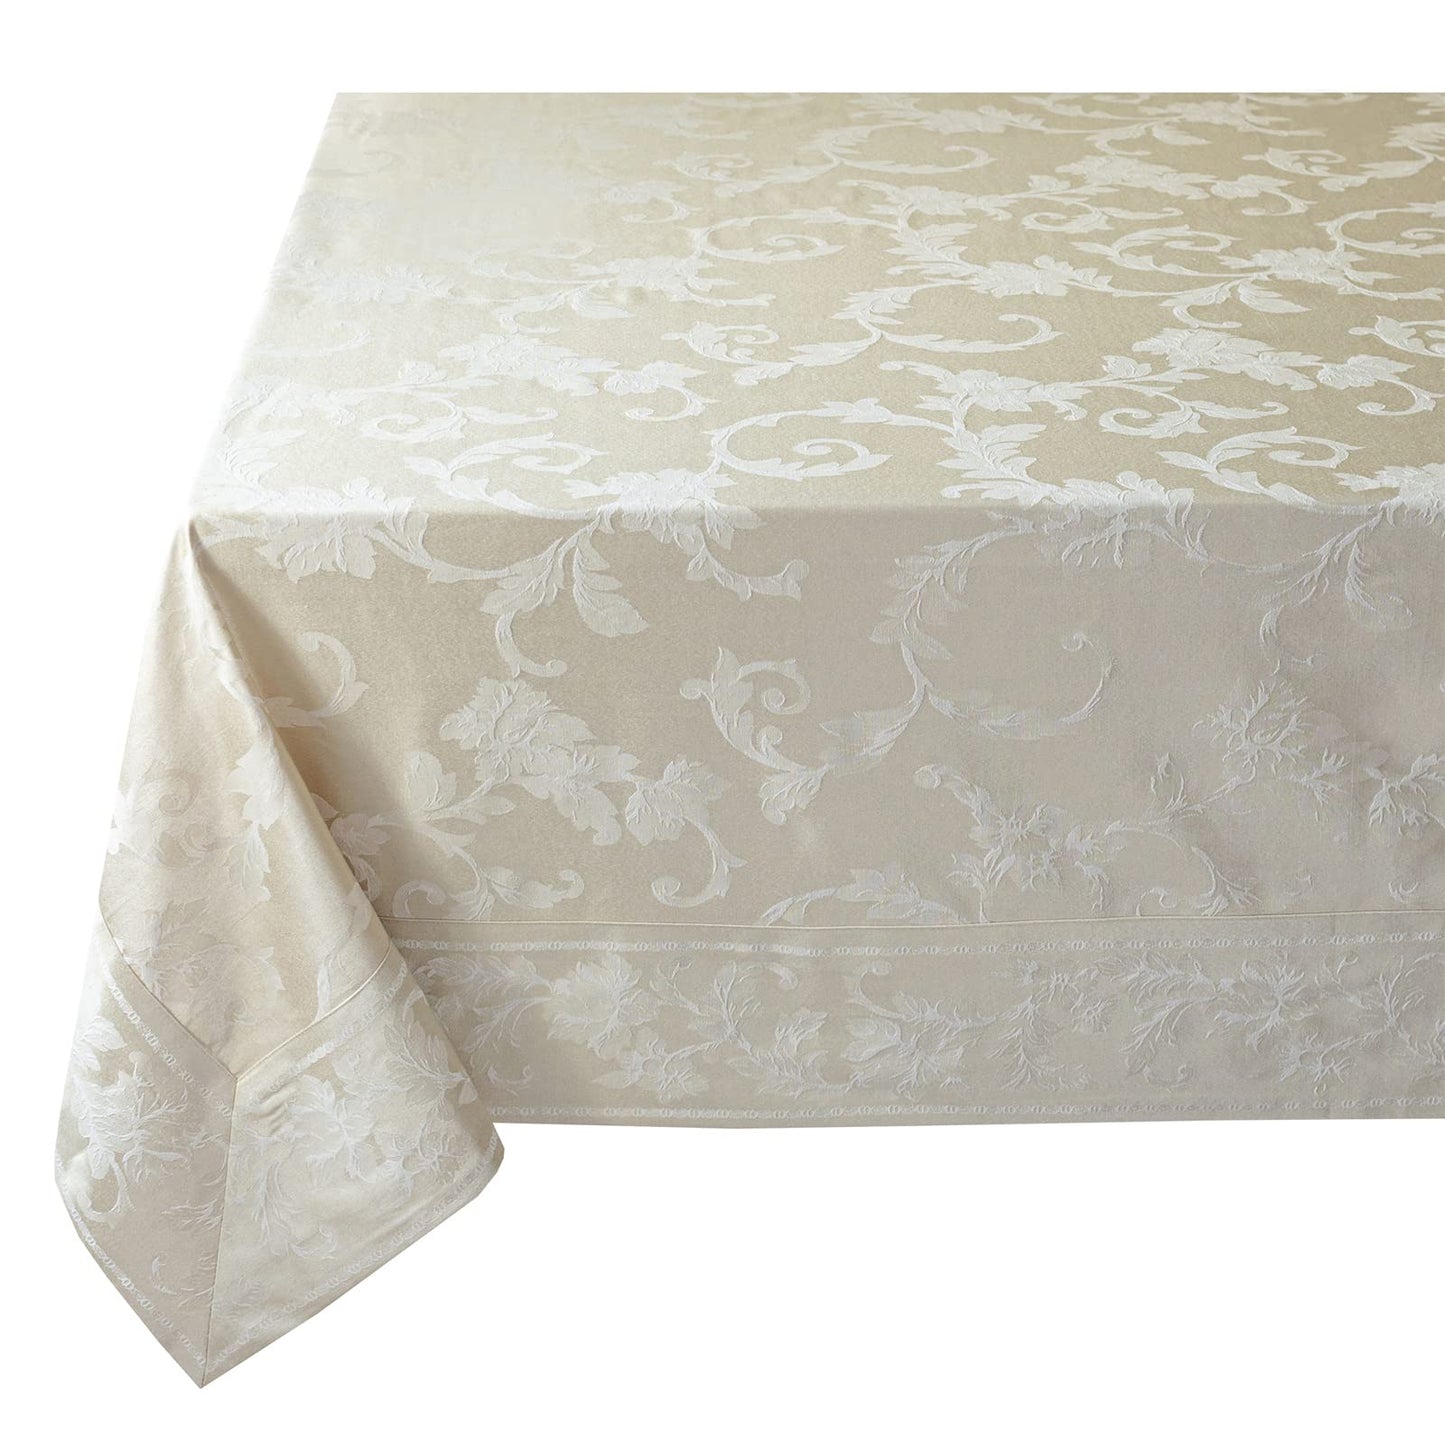 Benson Mills Harmony Scroll Woven Damask Fabric Tablecloth, Everyday, Parties, Special Occasions, Weddings and Holiday Table Cloth (60" X 104" Rectangular, Birch)